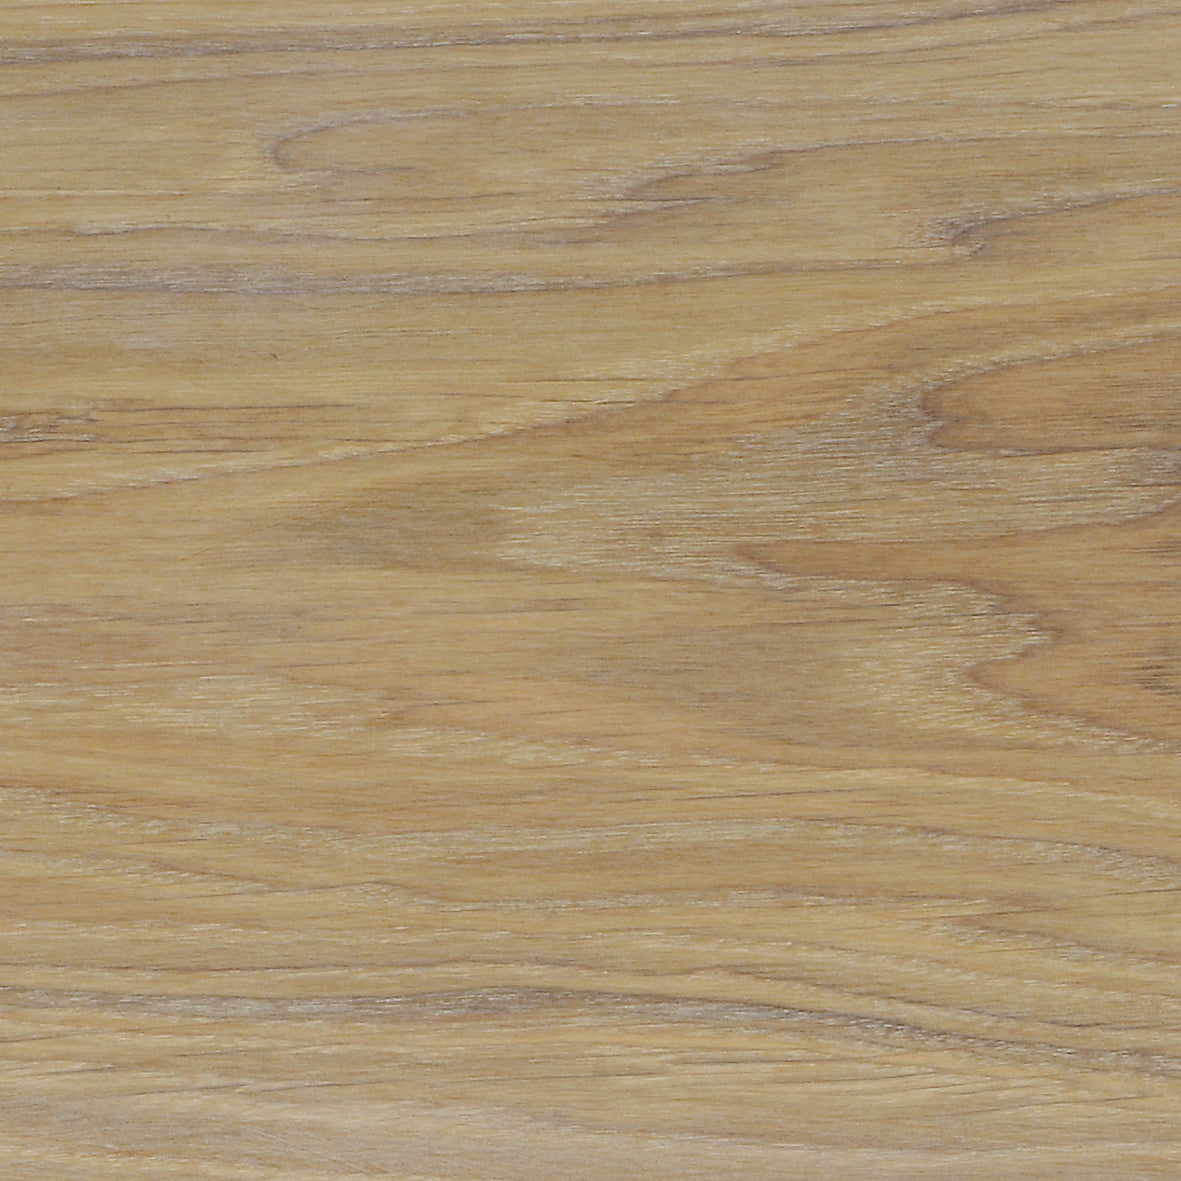 Rubio Monocoat 2C (A + B) - A&M Wood Specialty